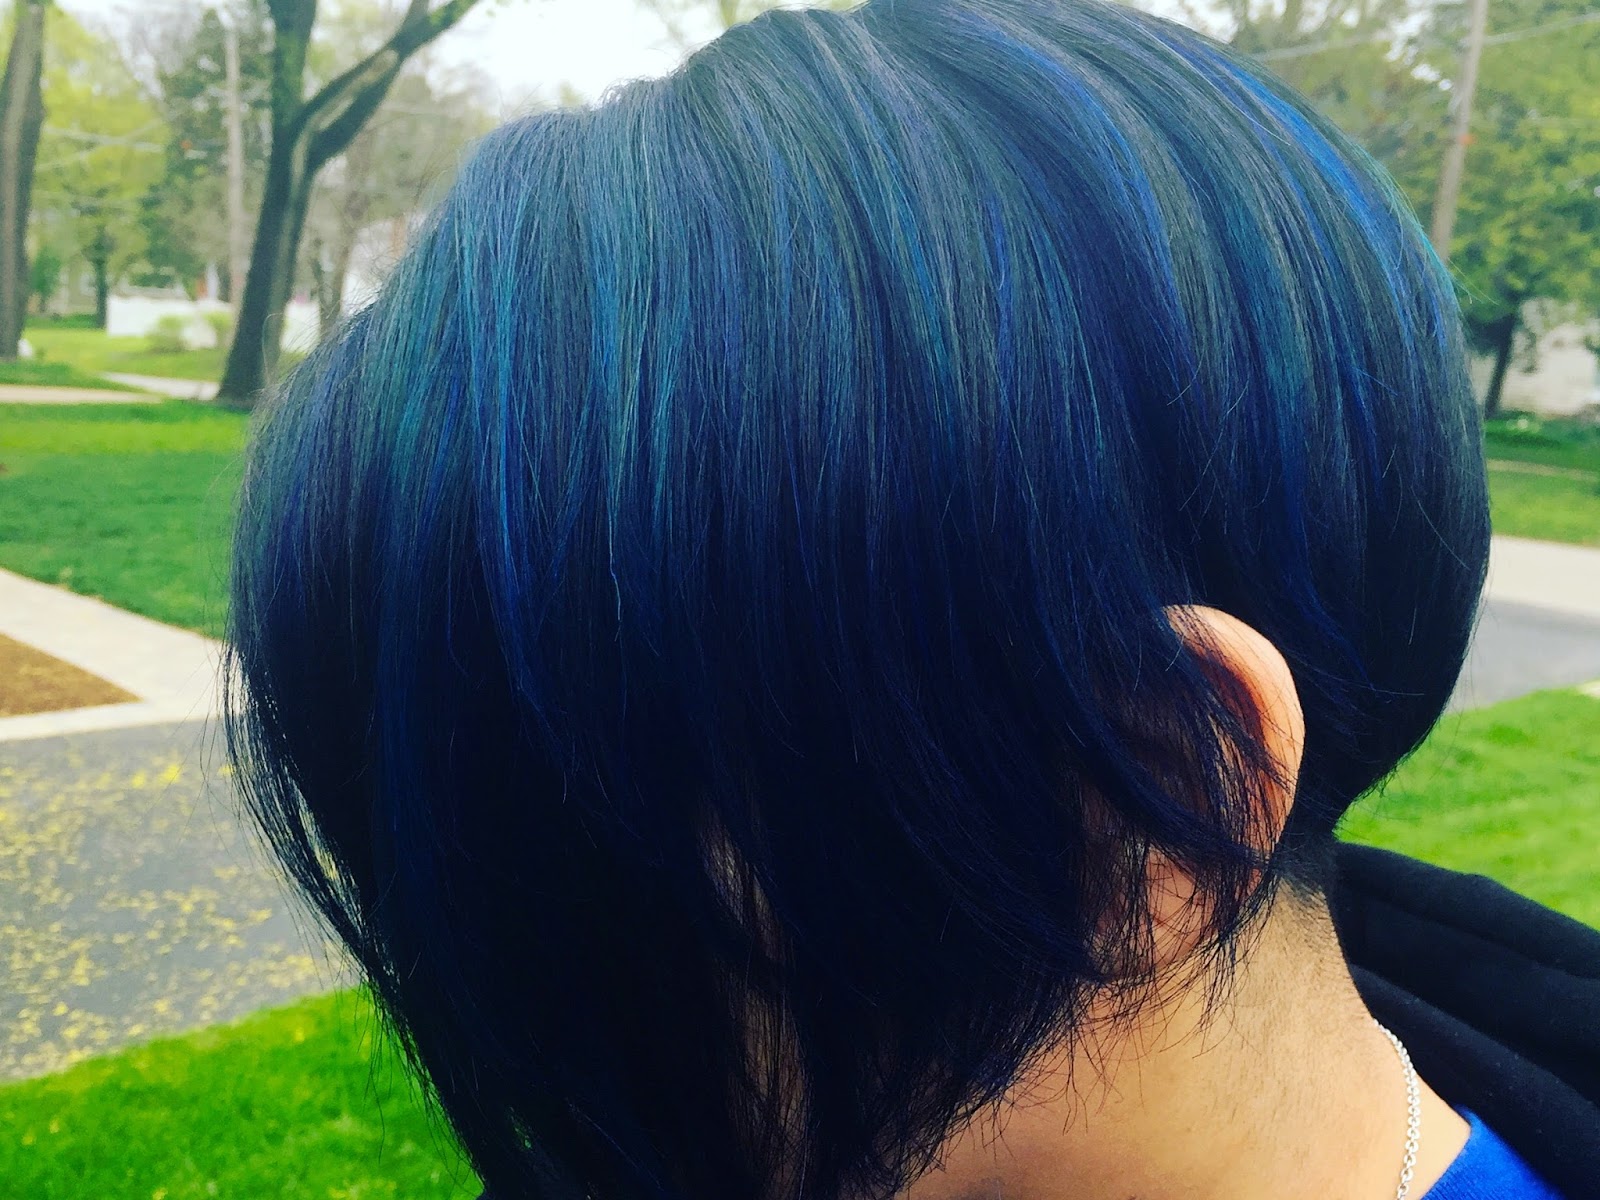 Turkish Blue Hair Color: Tips for Choosing the Right Shade - wide 8